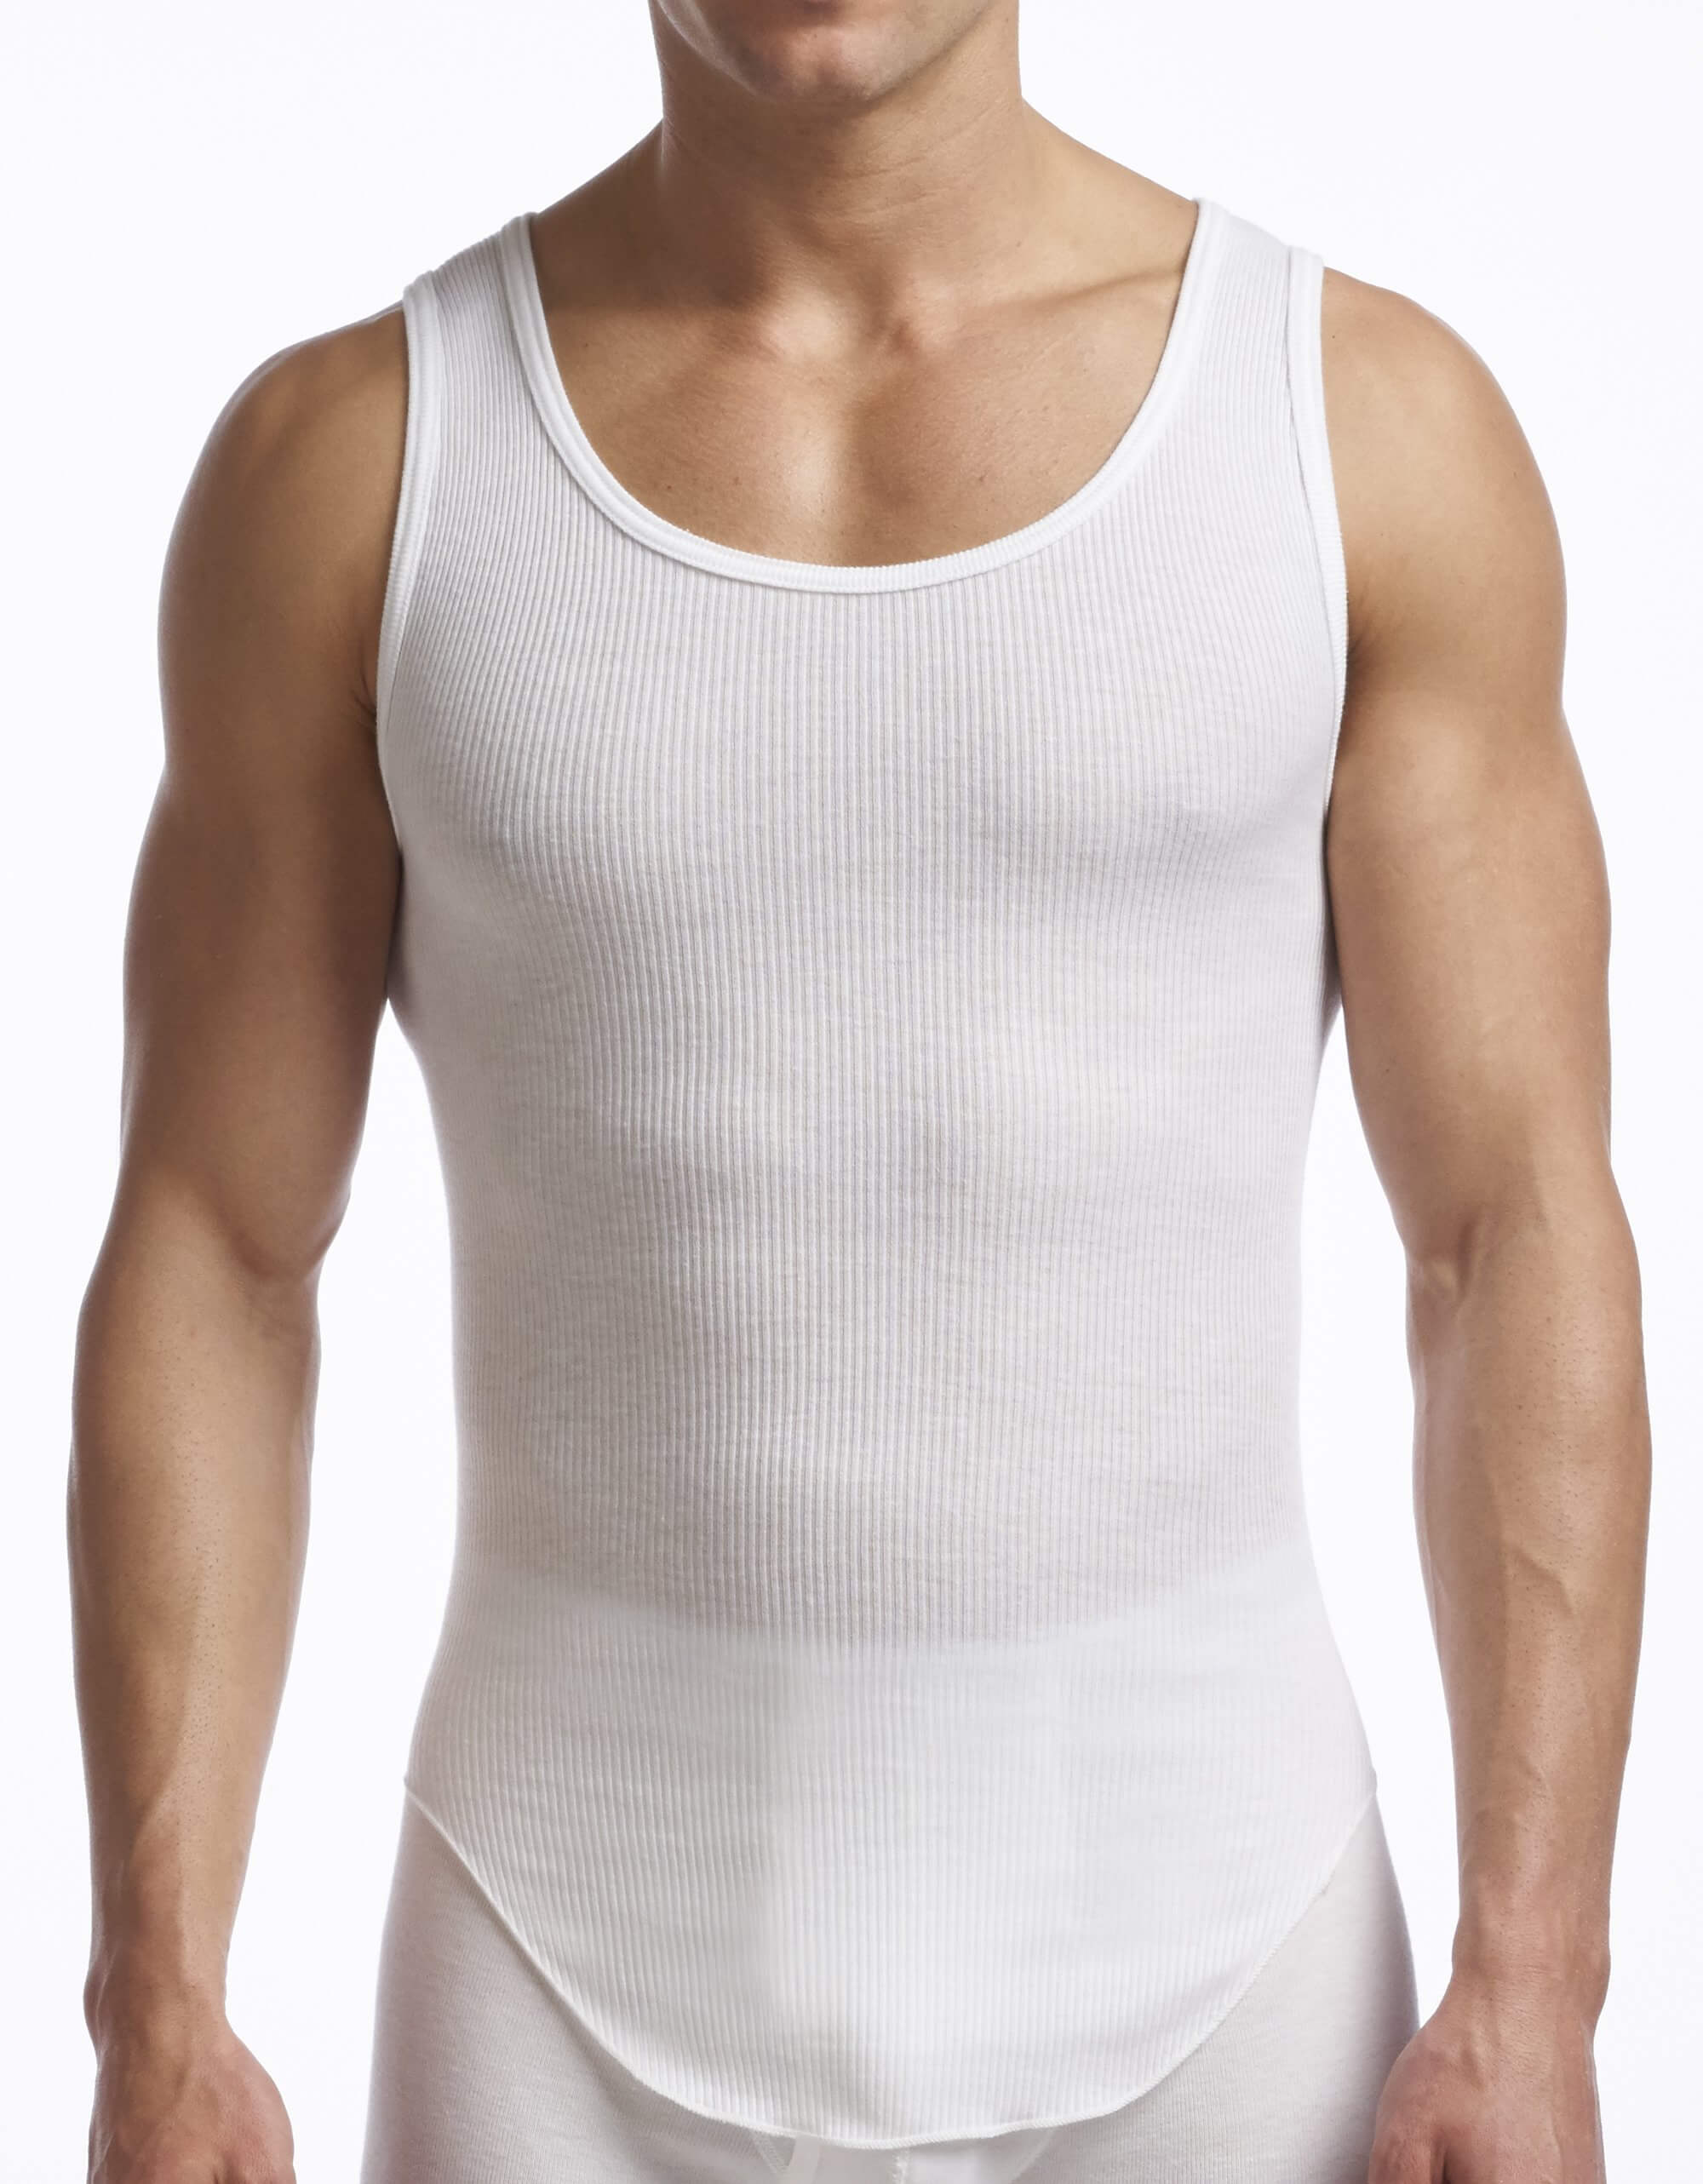 Men's undershirts: well-shaped & high-quality